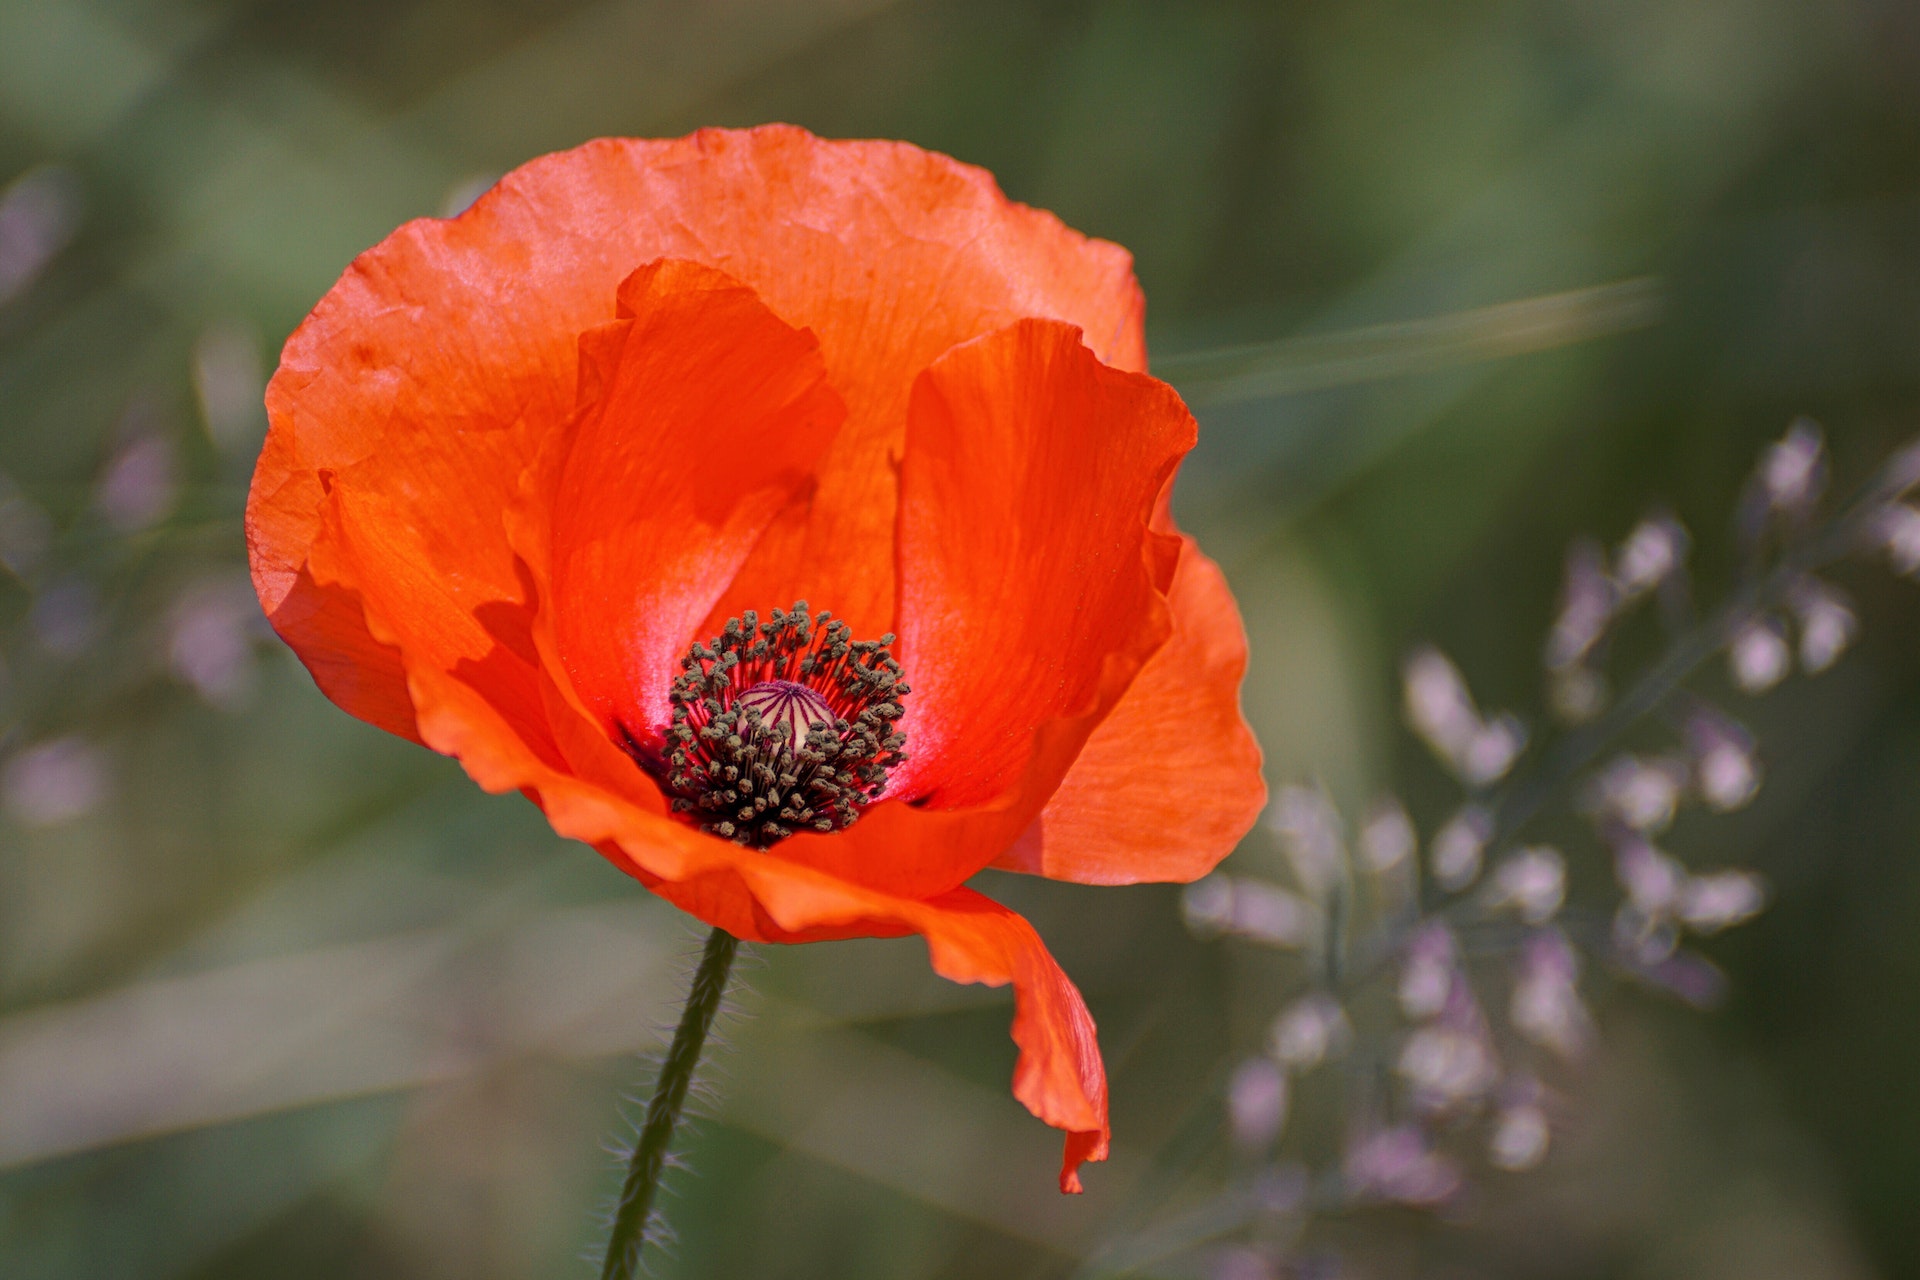 Wild poppy seeds: find out what its health properties